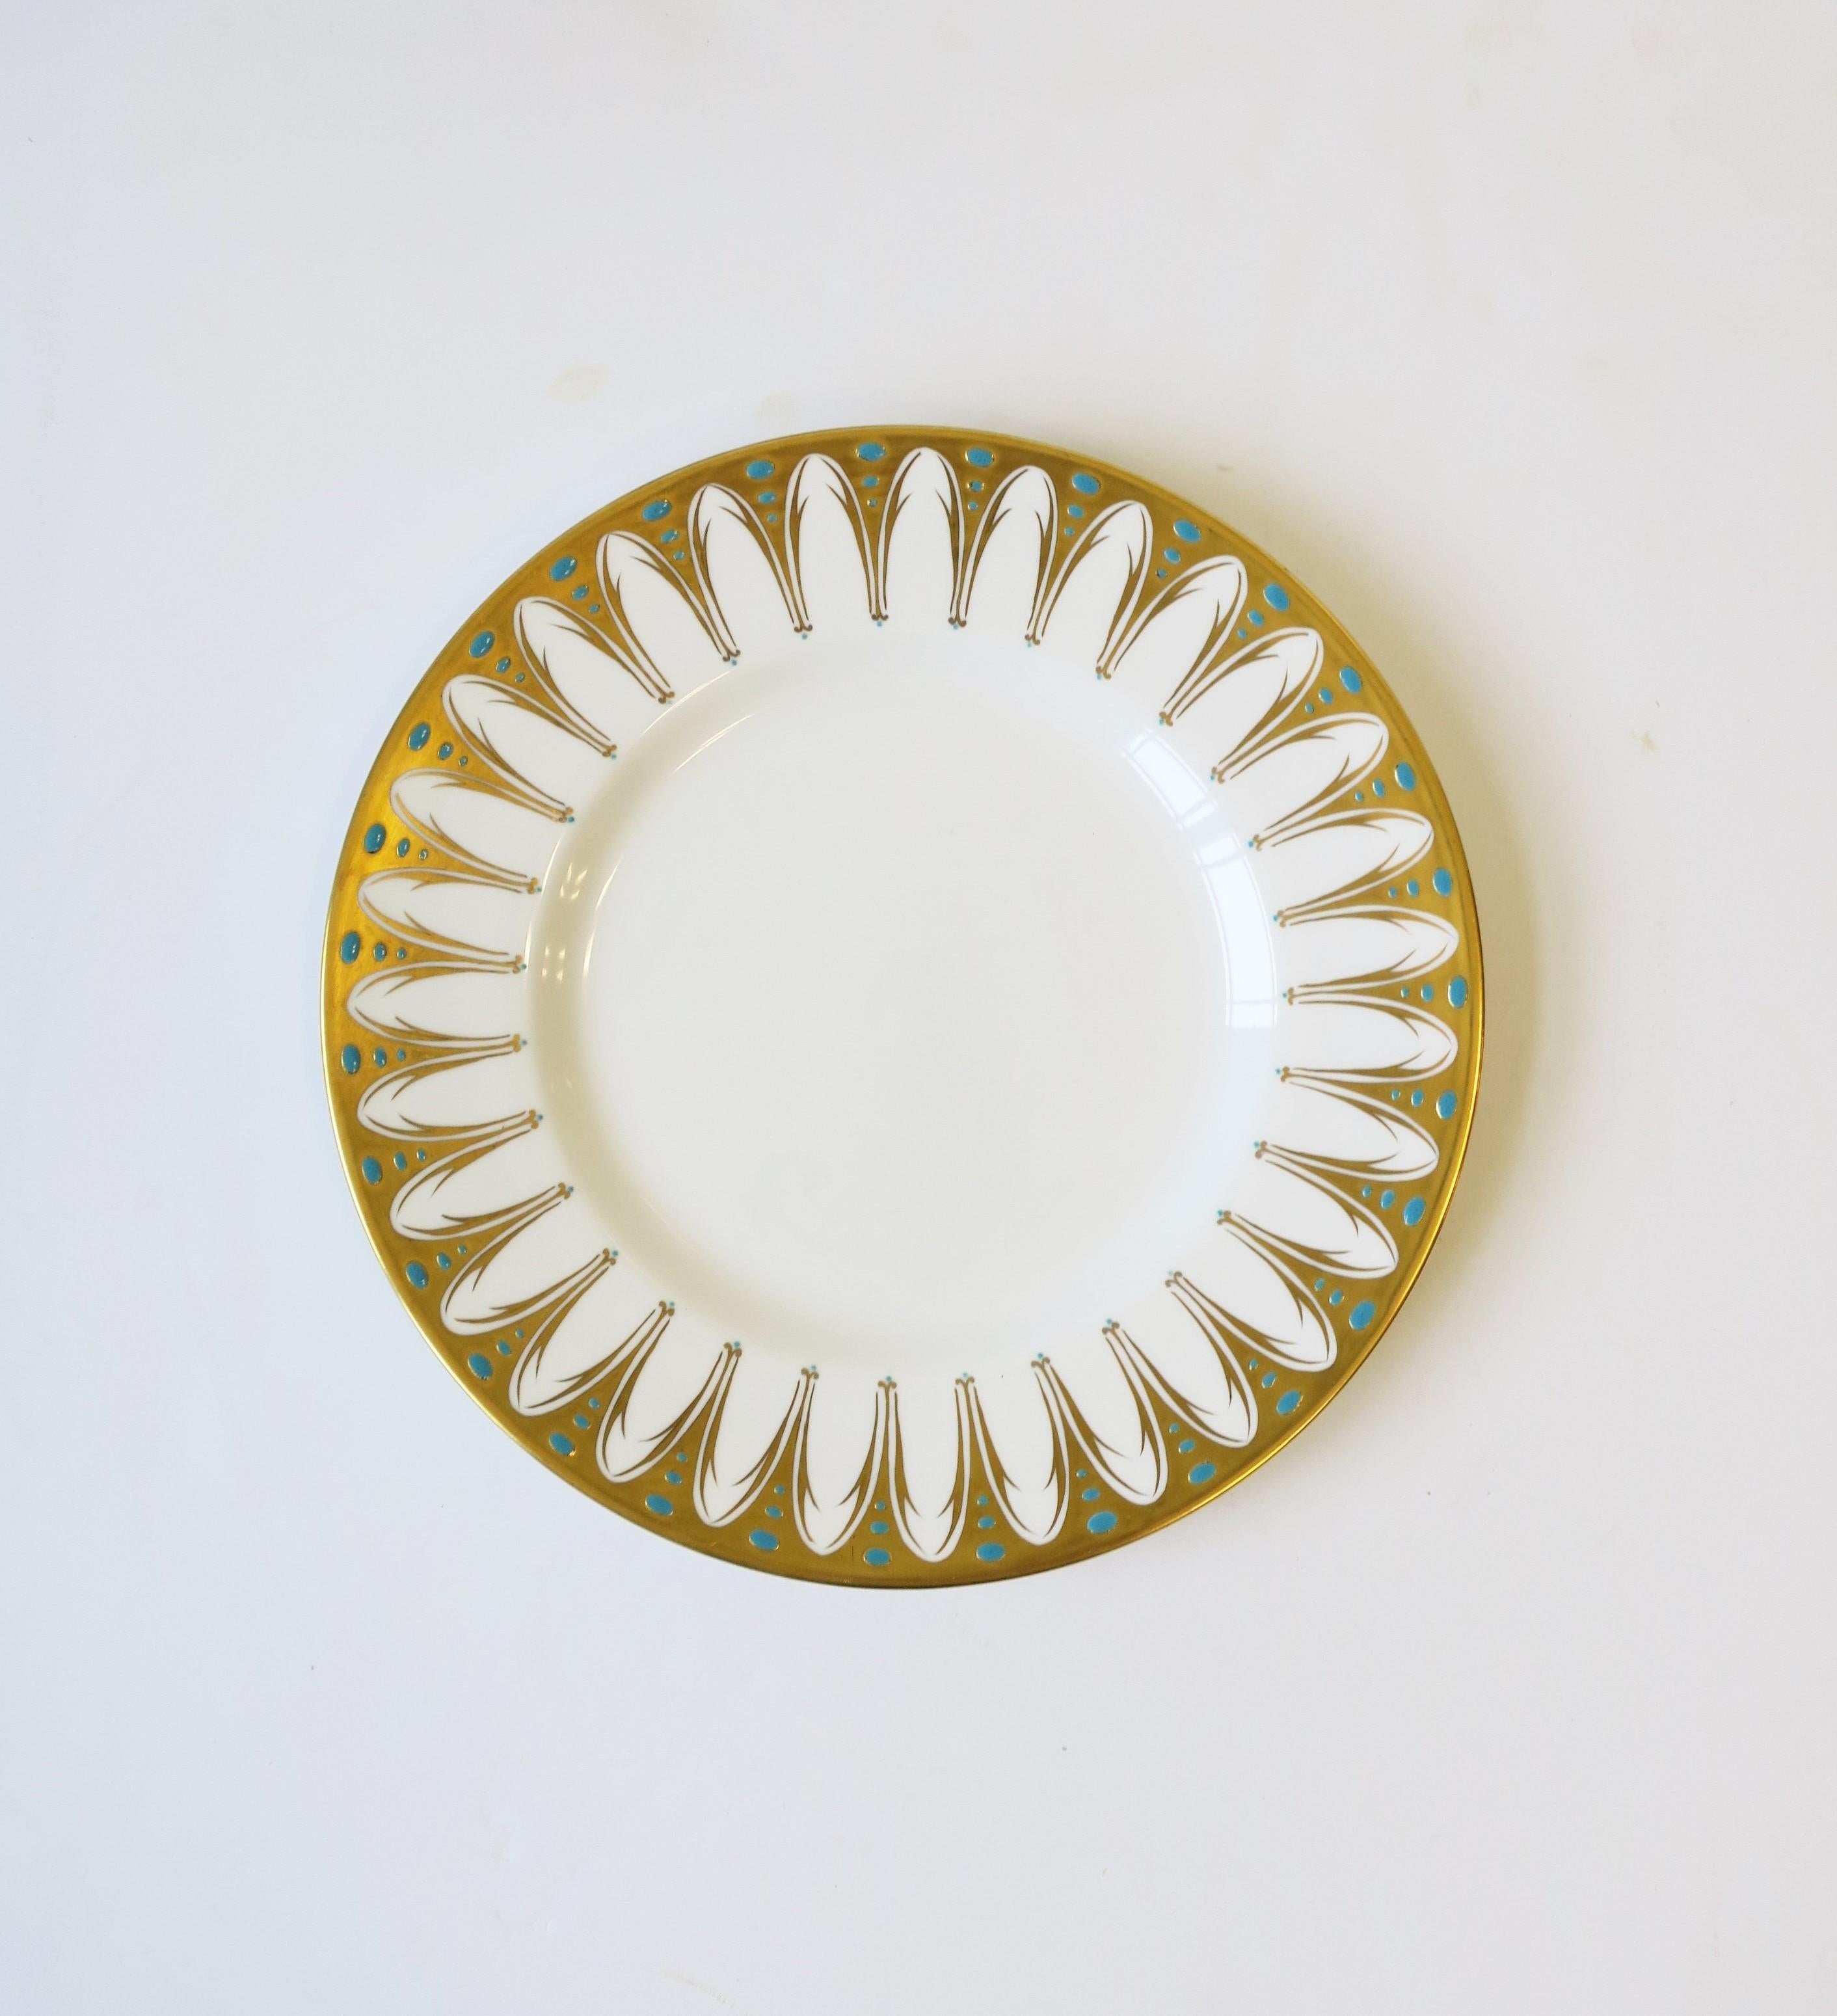 A gorgeous English porcelain dinner plate made by Royal Chelsea, circa early to mid-20th century, 1940s -1960s, England. Plate is decorated with 22-karat gold and small turquoise blue dots, raised, on an all-white ground, in the 'Gothic' pattern